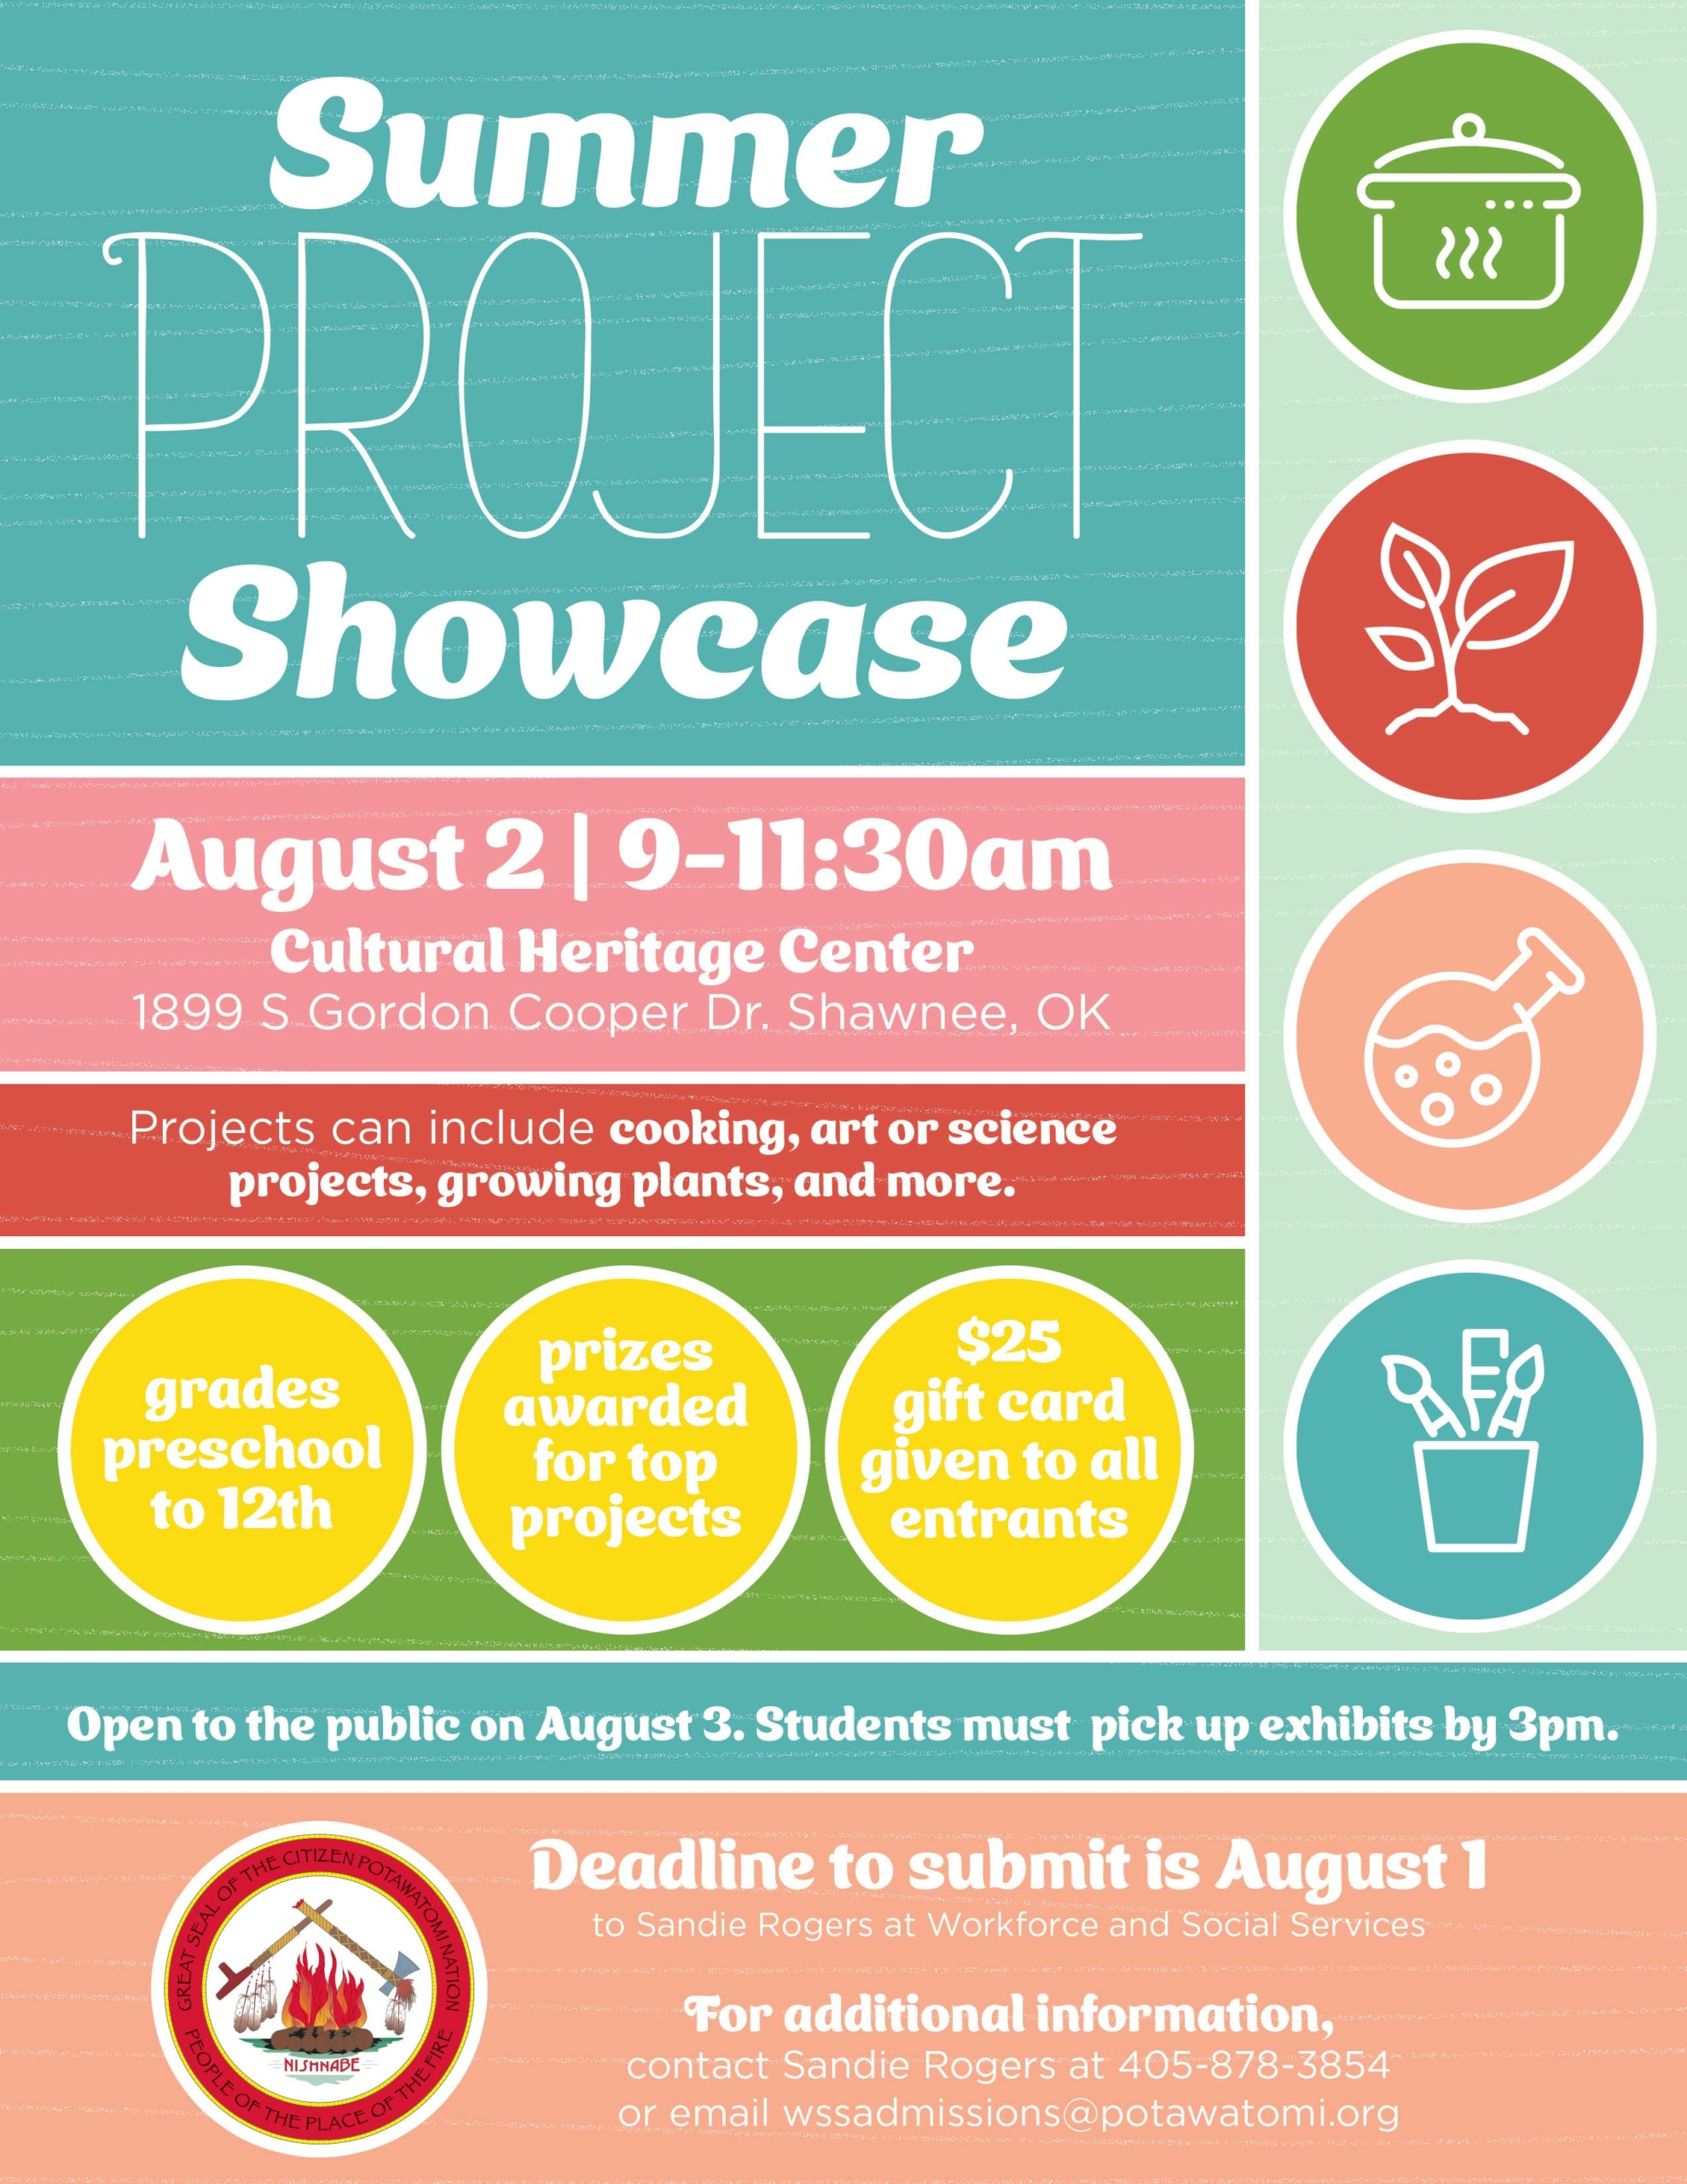 colorful flyer in primary colors and pastels advertising this year's Workforce and Social Services Summer Project Showcase on August 2 and 3, 2022.